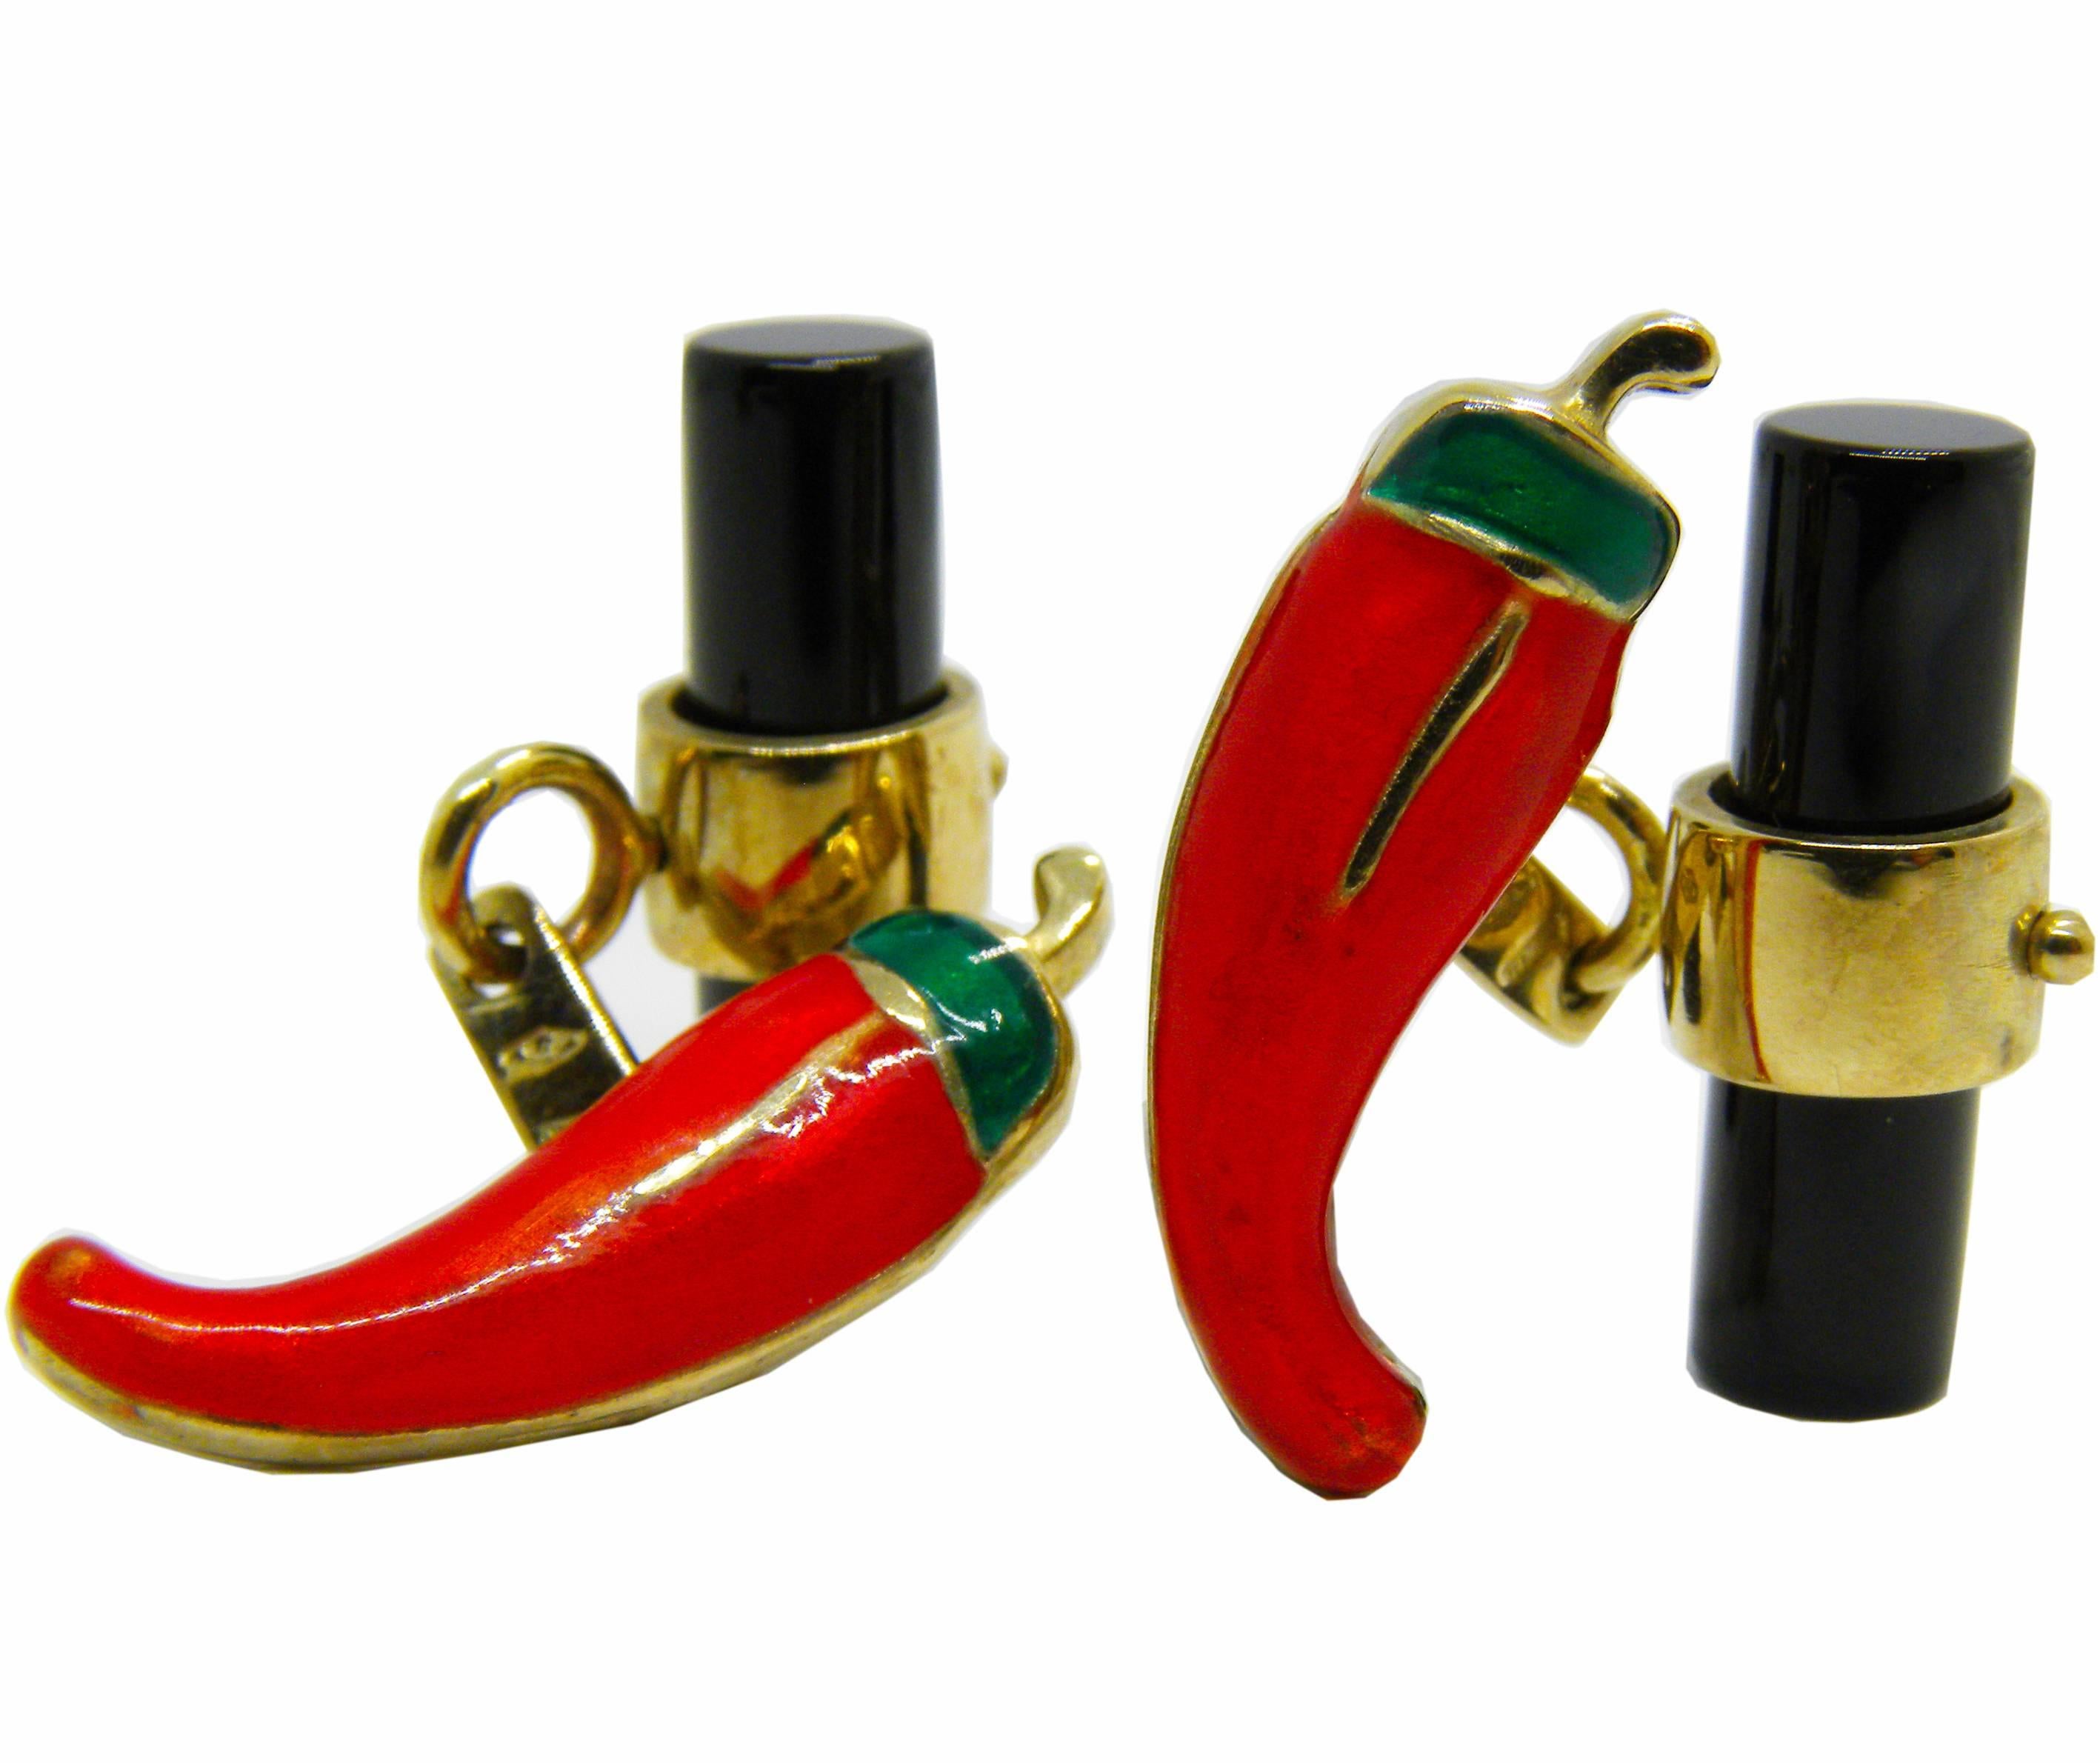 Unique yet Chic Hand Enameled Red Pepper Lucky Charm Cufflinks, onyx stick back, 9K  Yellow Gold setting.
In our smart Black Box and Pouch.